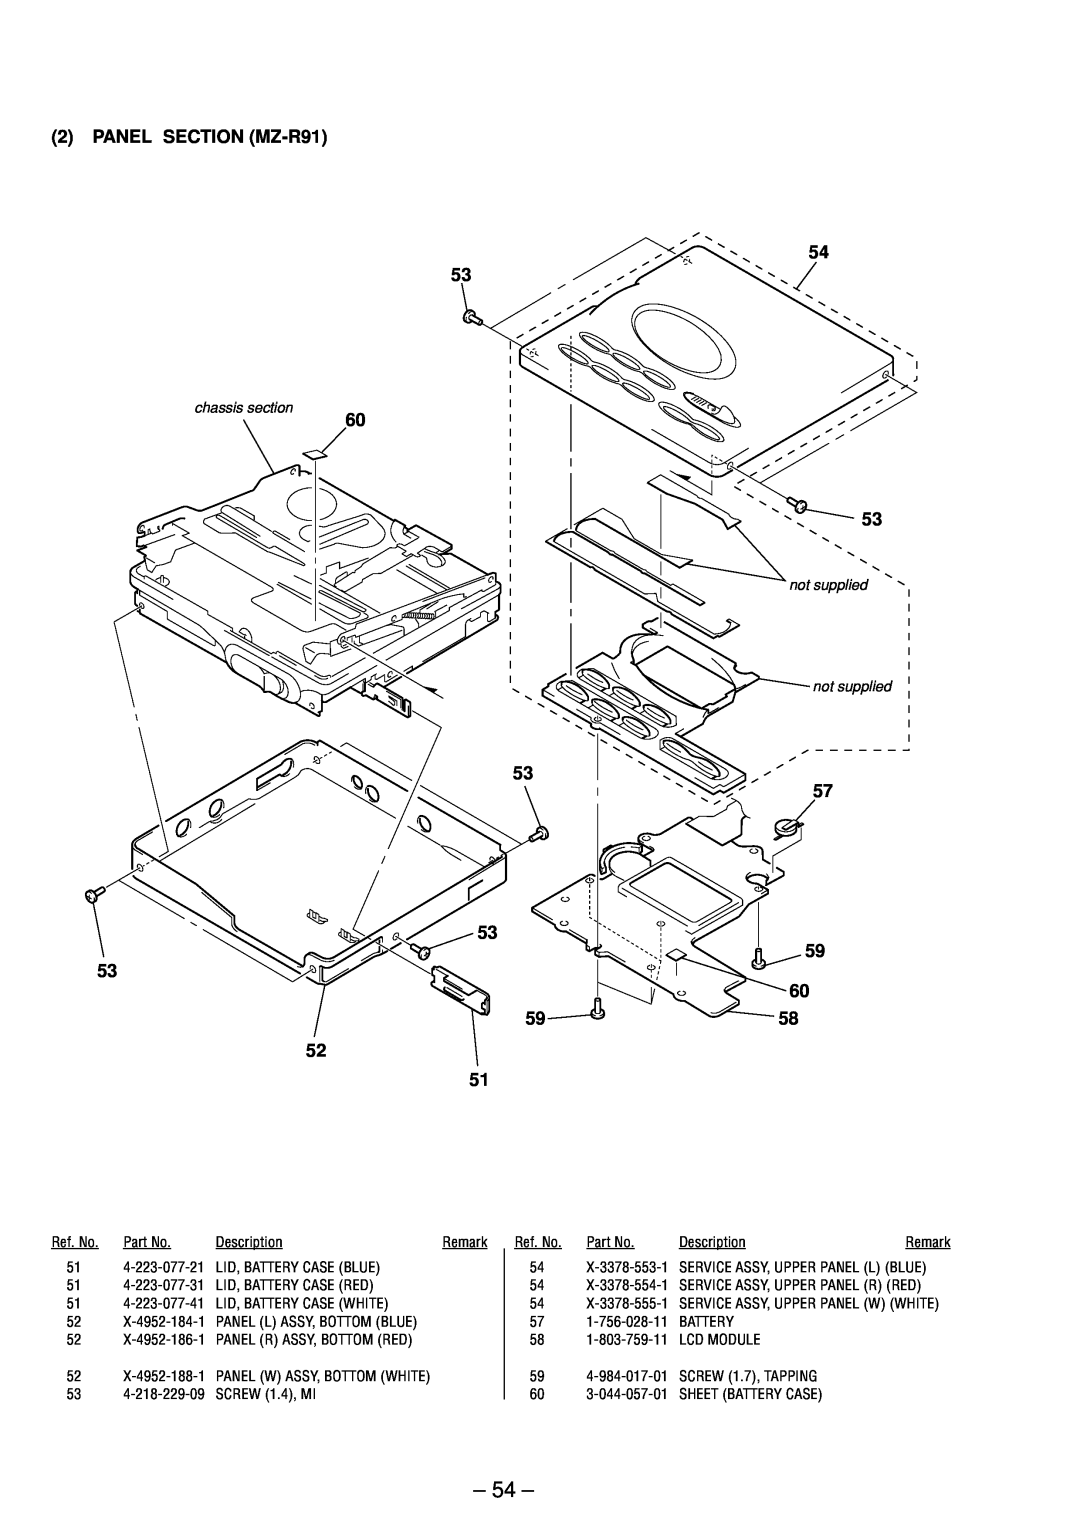 Sony service manual PANEL SECTION MZ-R91 